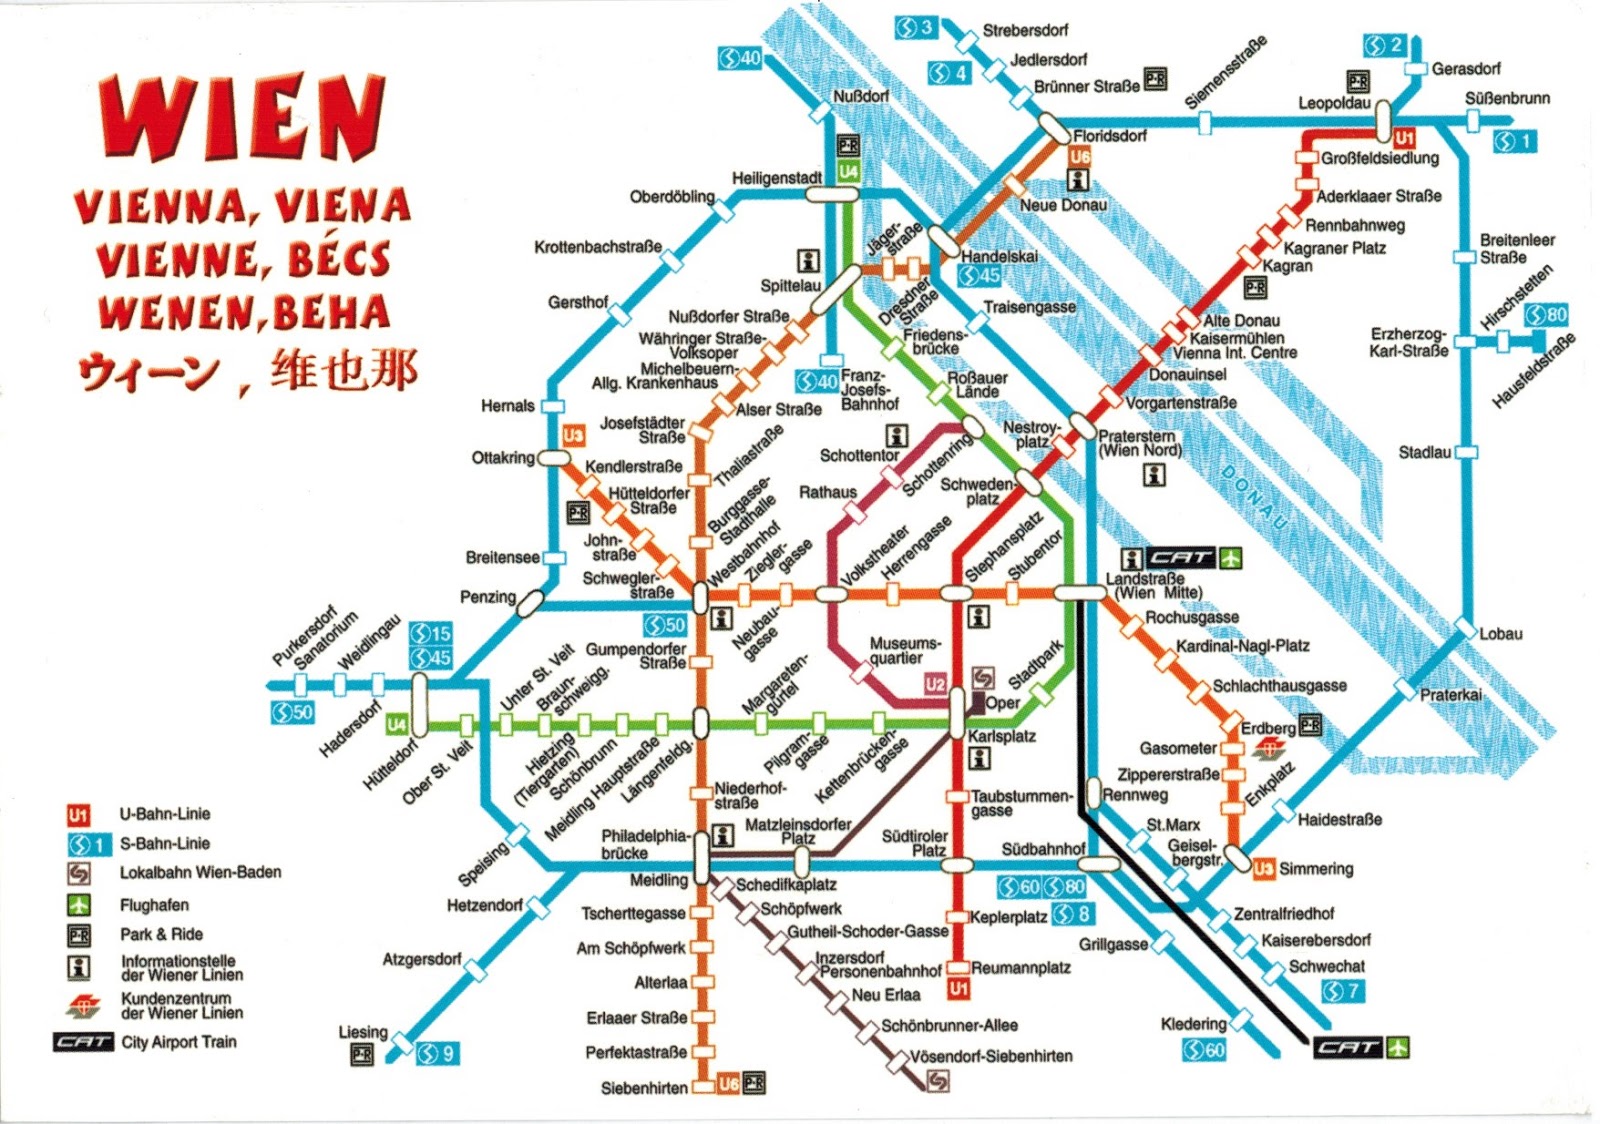 Vienna Metro Map With Attractions - Map of world